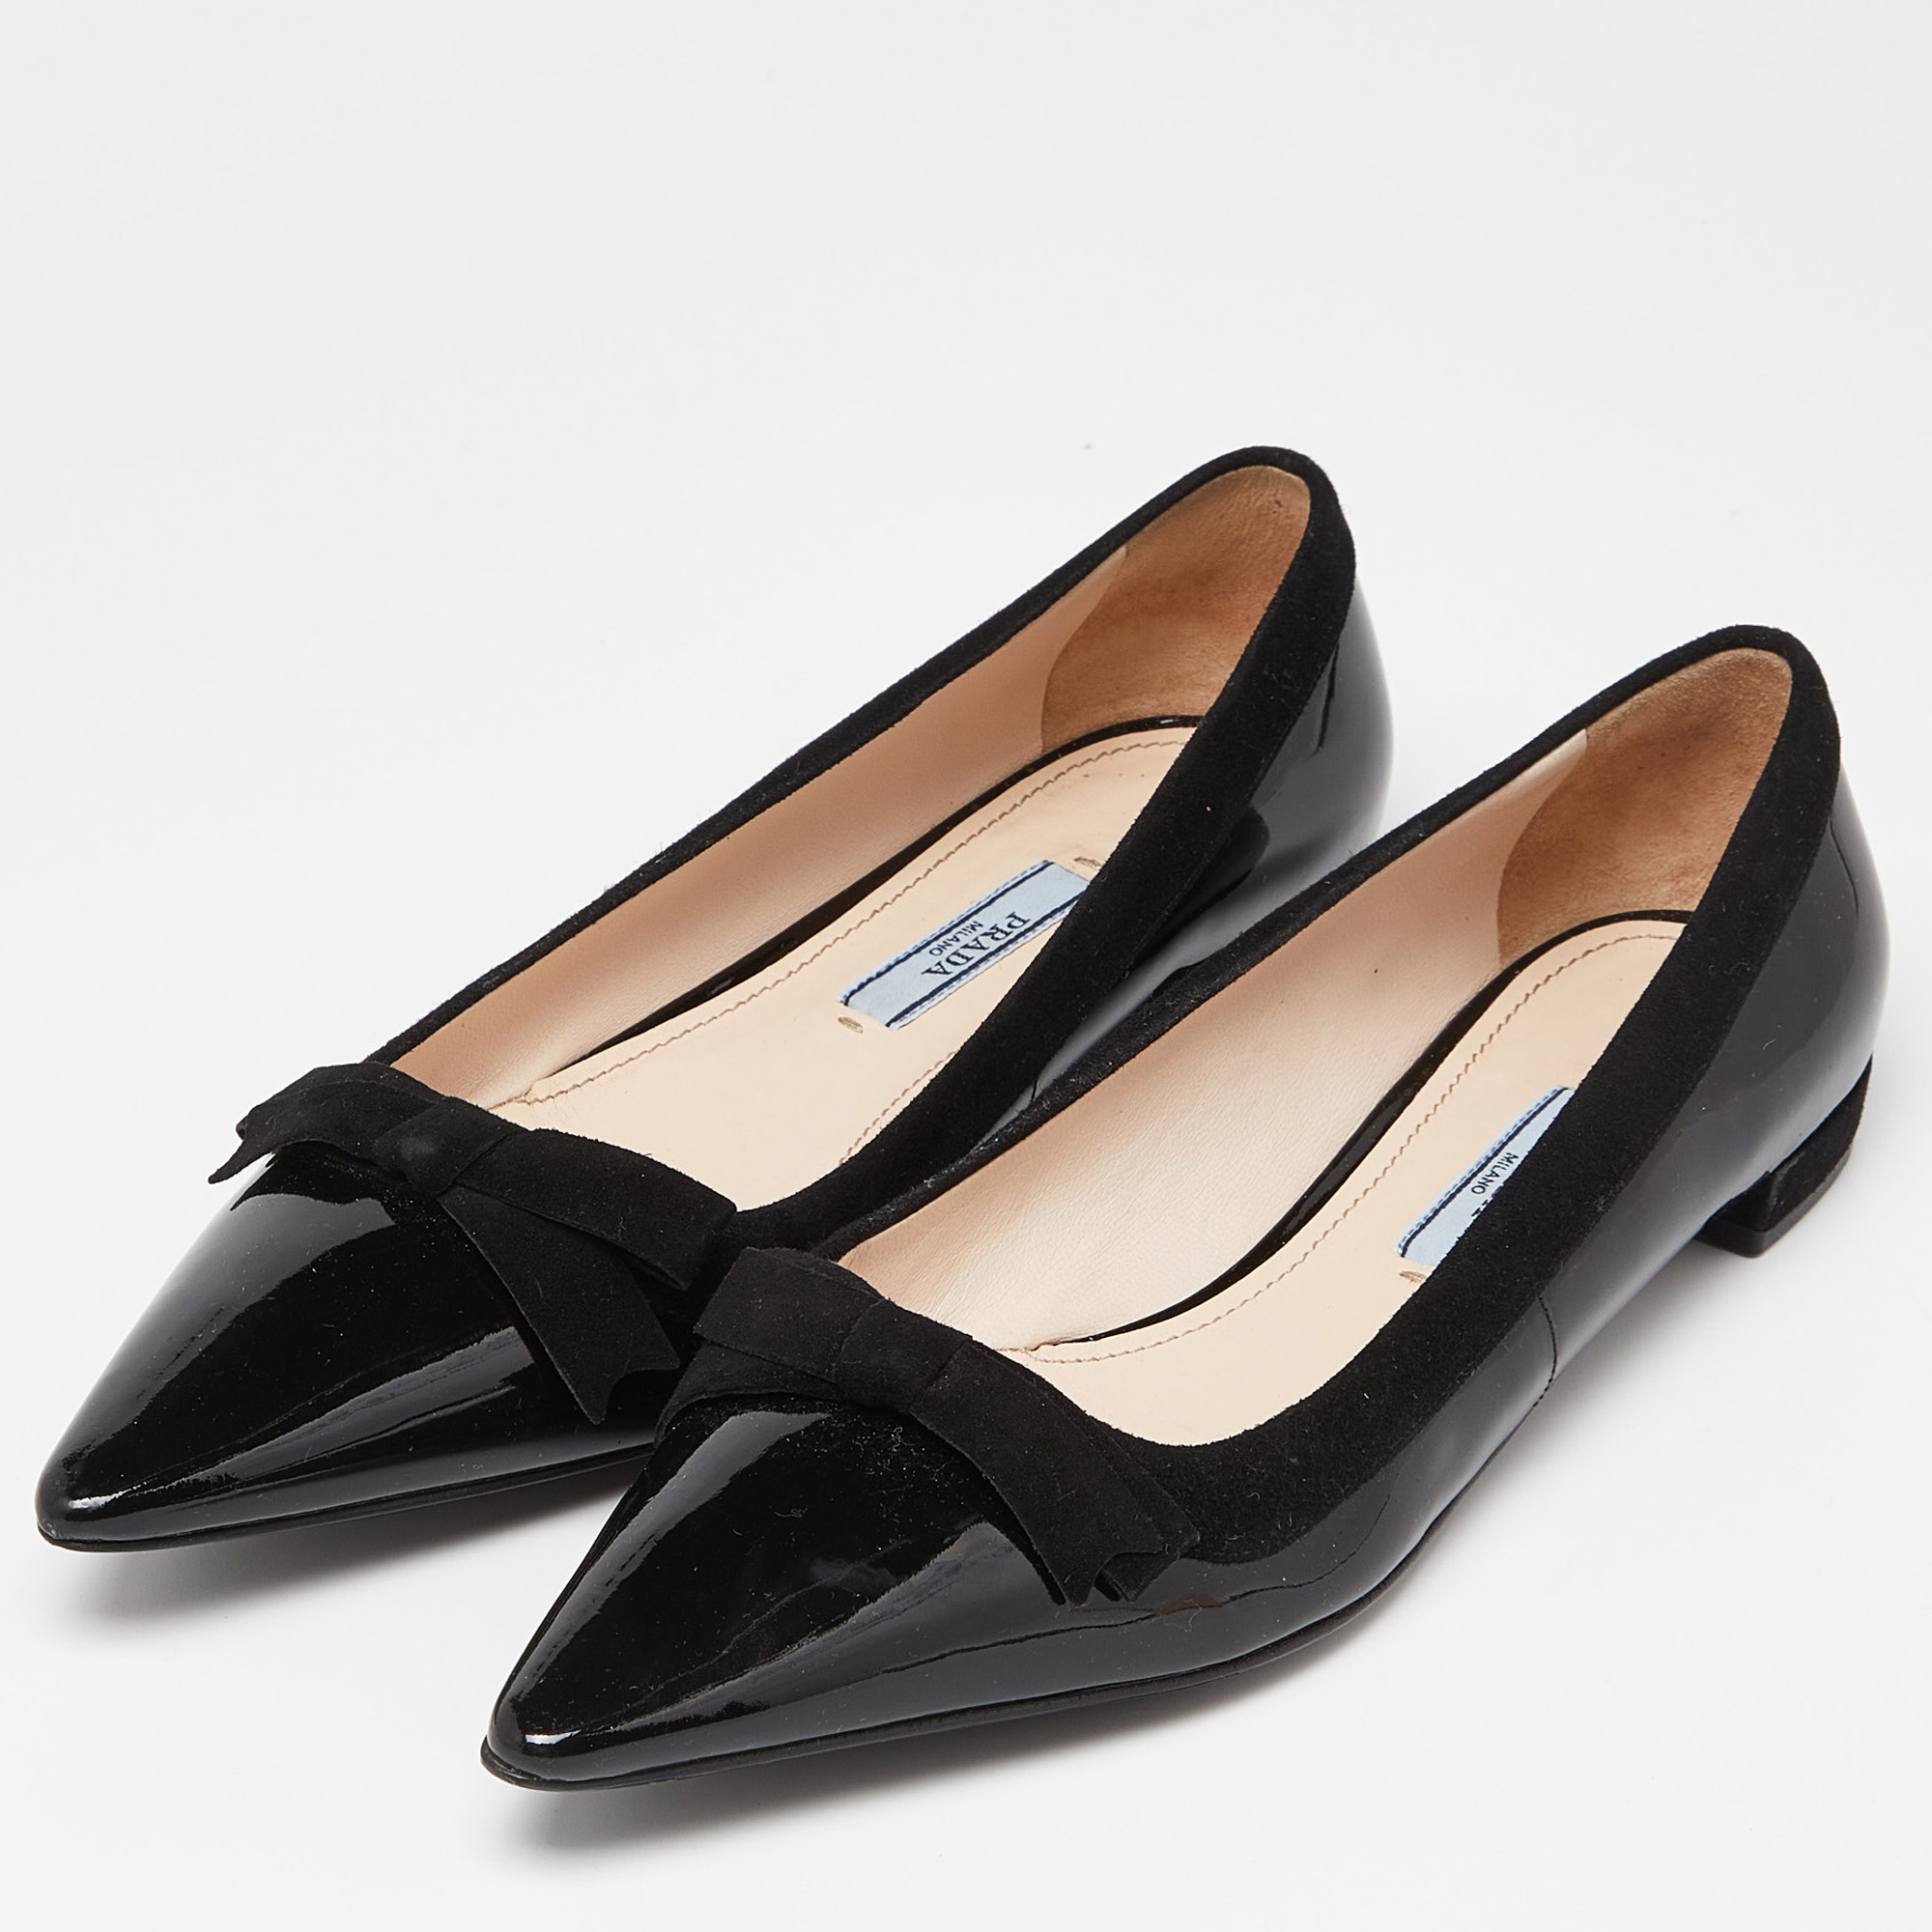 

Prada Black Patent Leather Bow Pointed Toe Ballet Flats Size